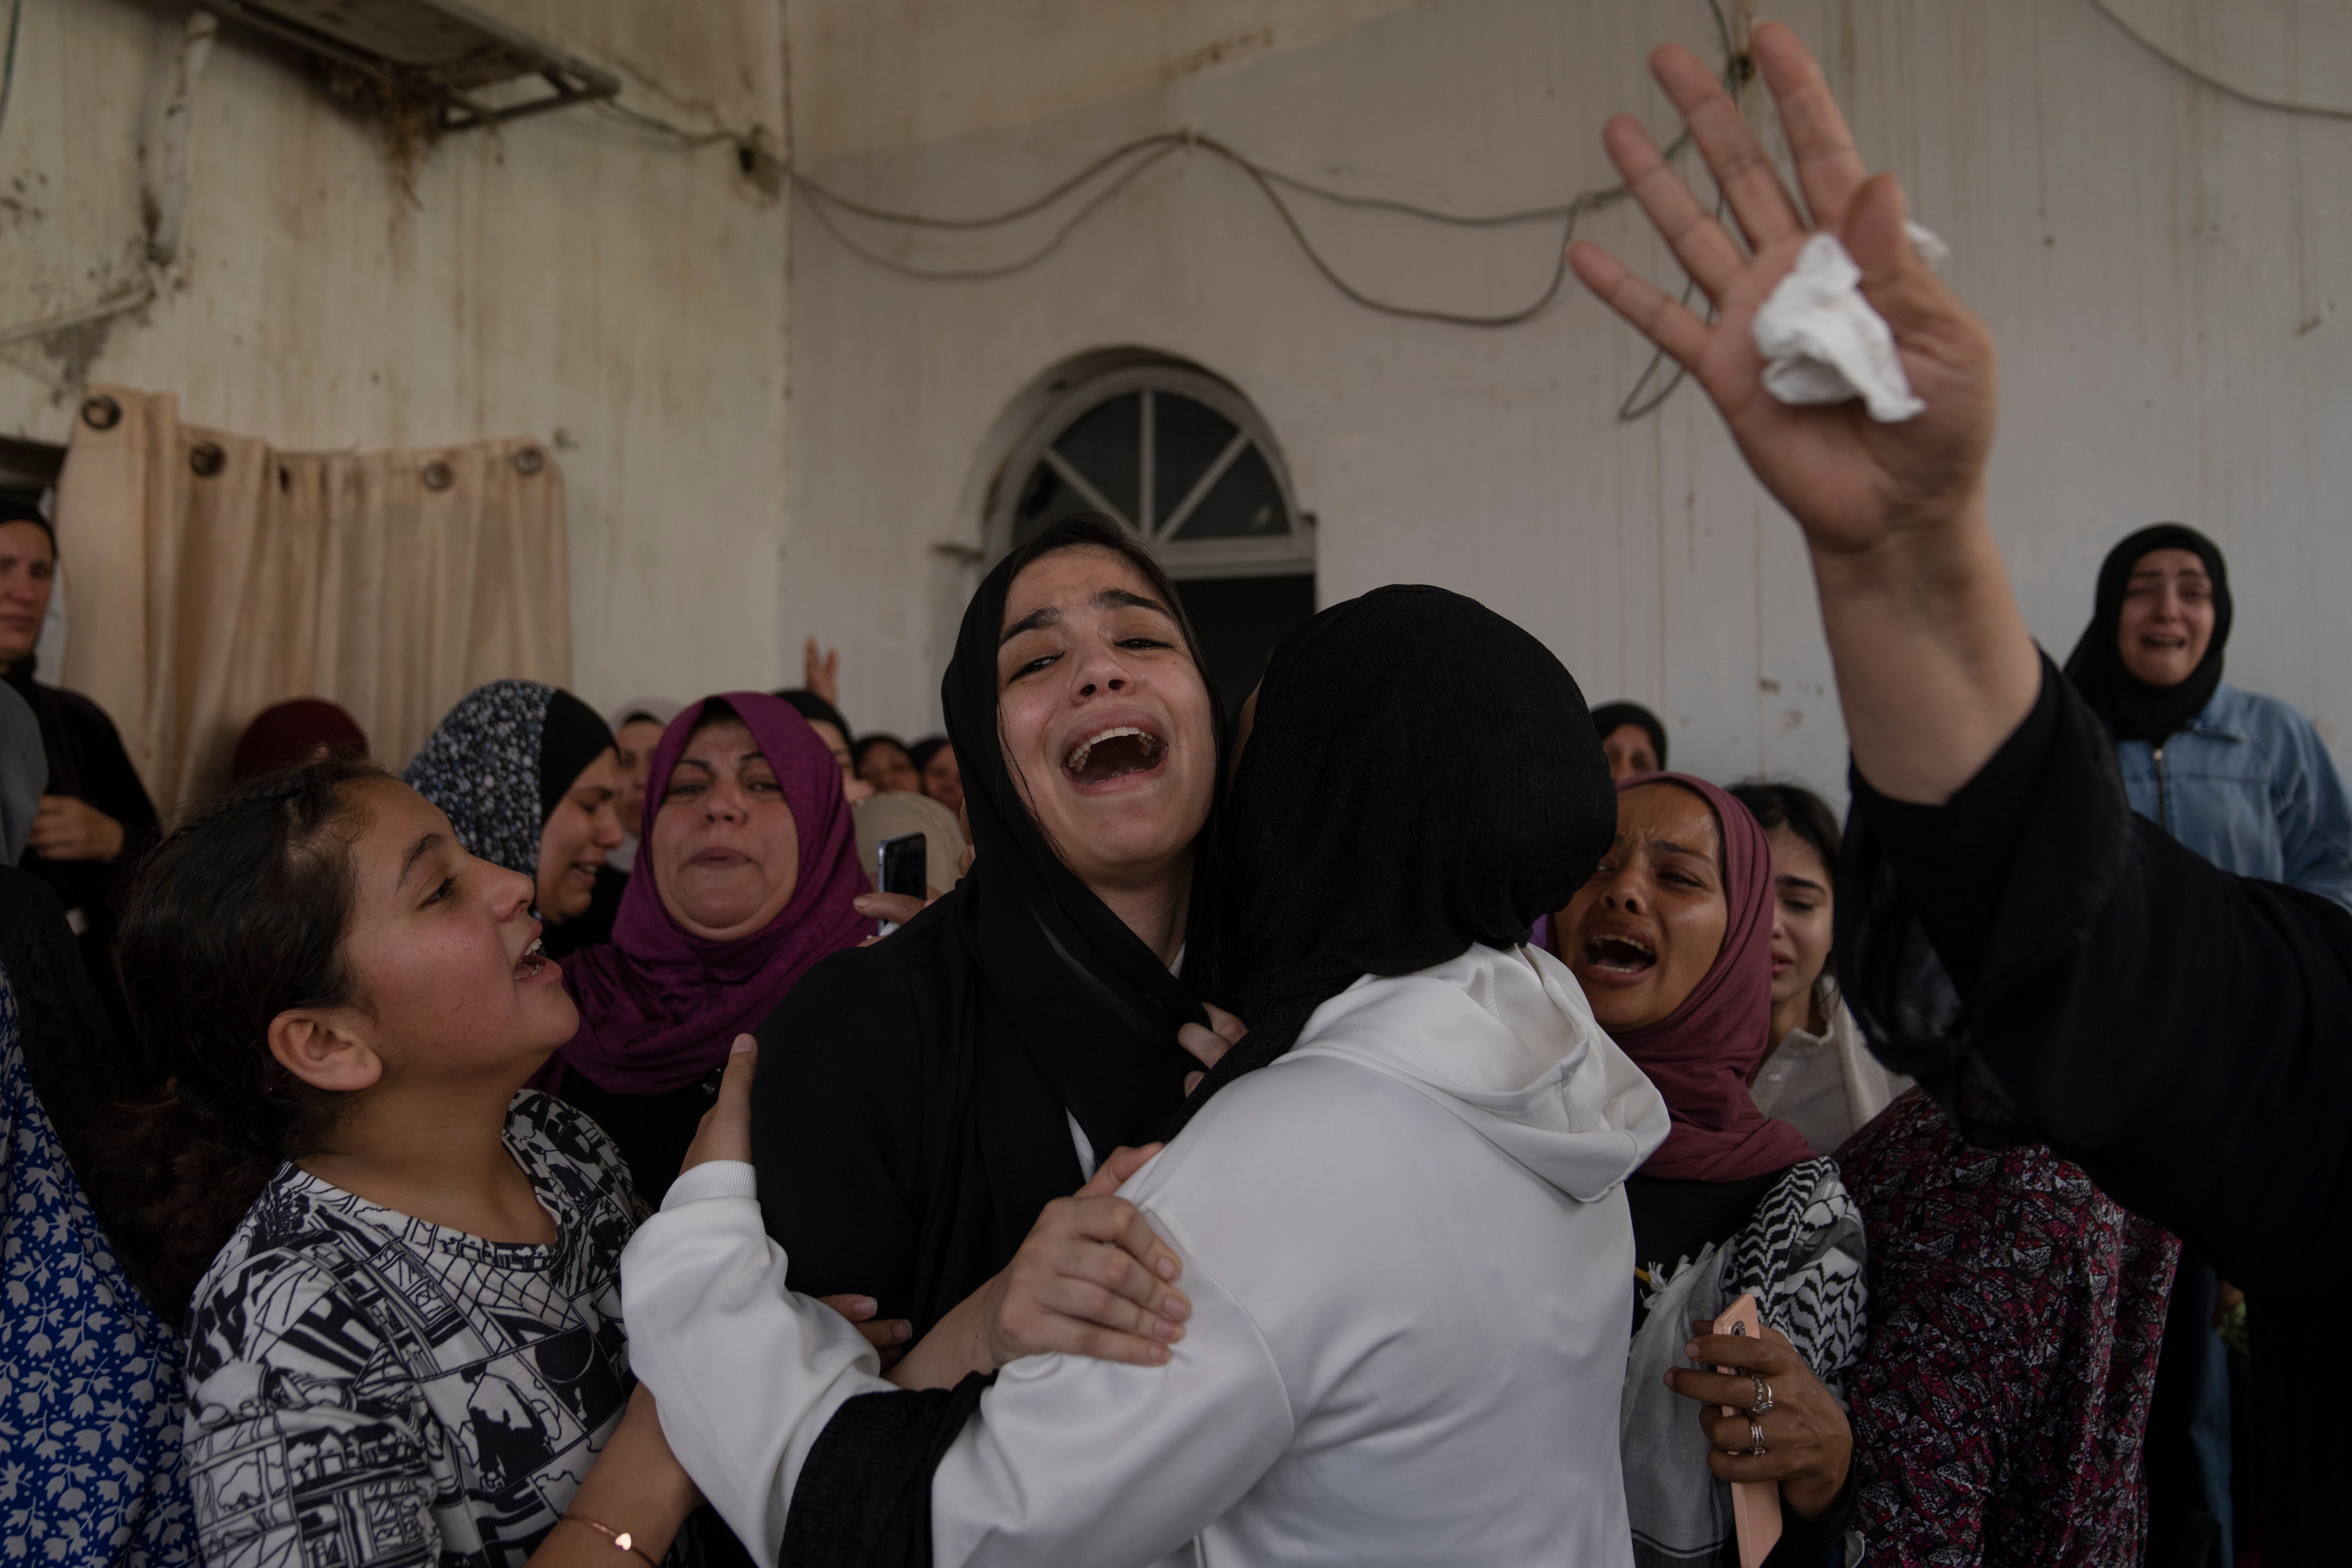 Palestinian mourners cry after taking the last look at the body of Mohammad Balhan, 15, during his funeral in the West Bank refugee camp of Aqabat Jaber, Jericho